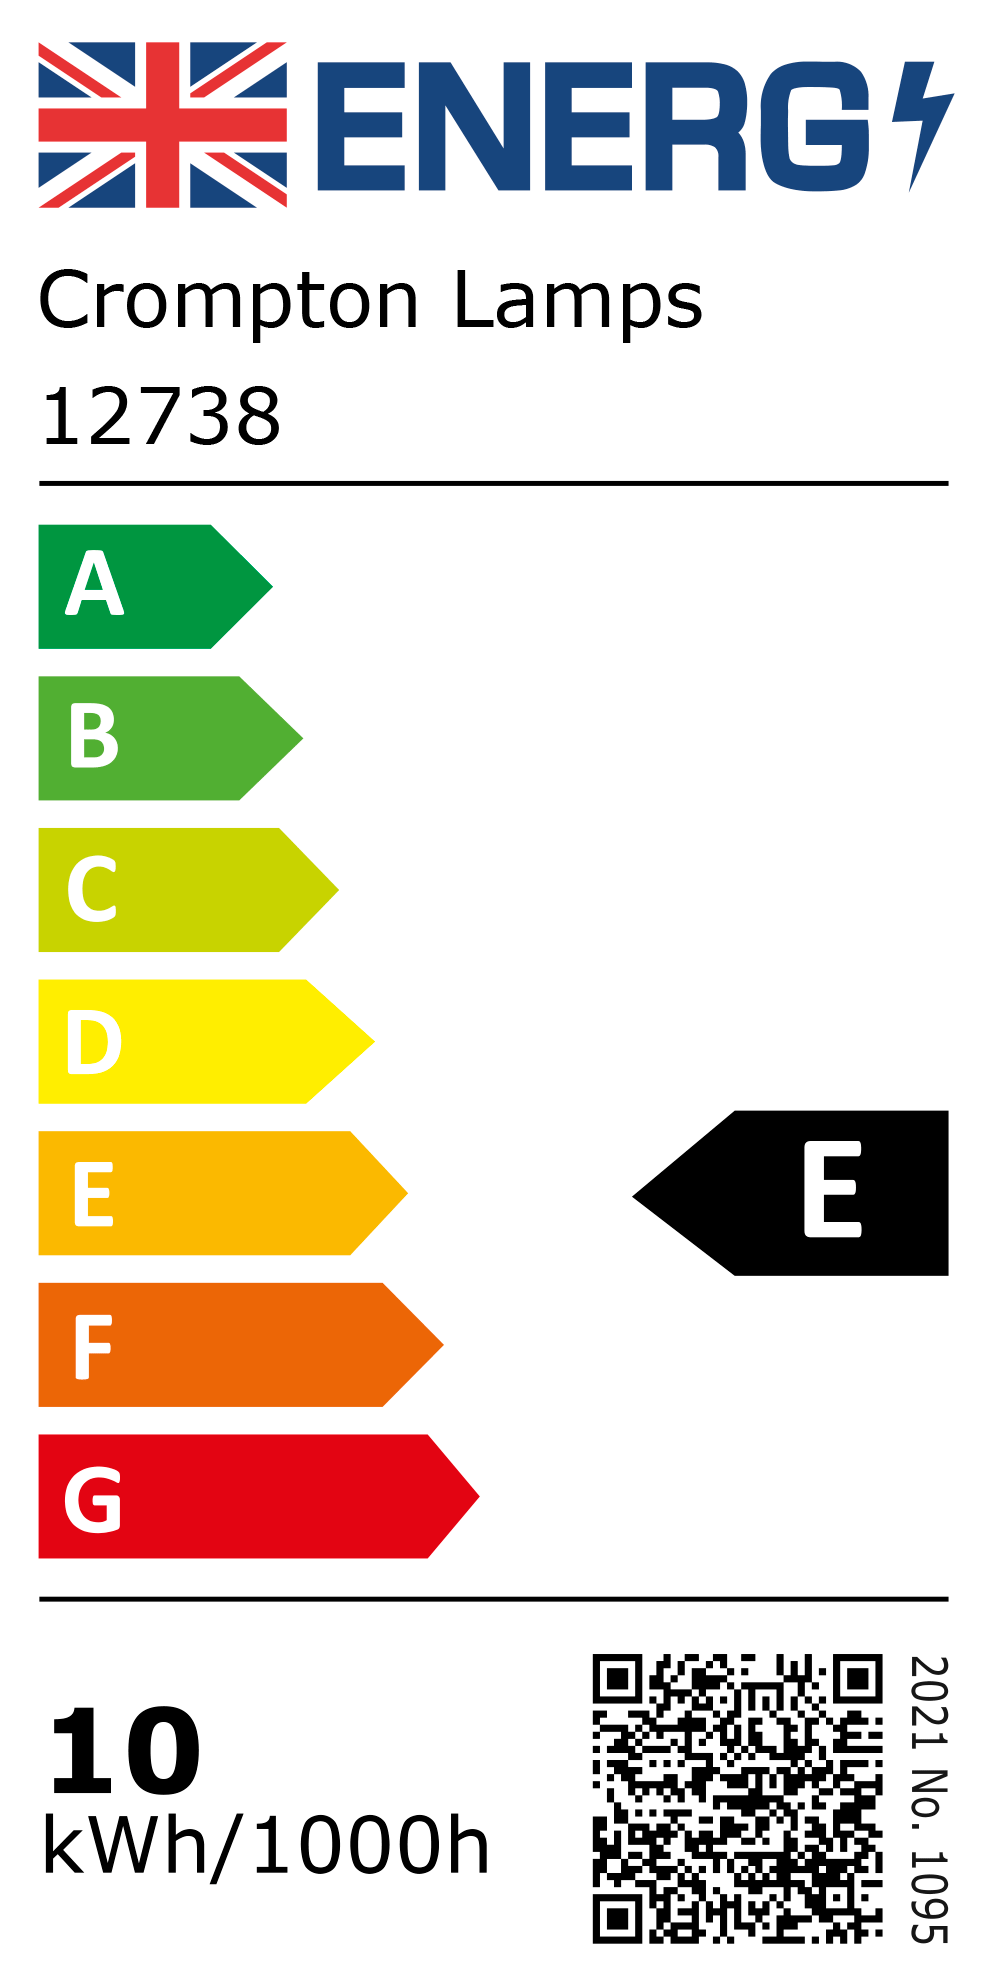 New 2021 Energy Rating Label: Stock Code 12738